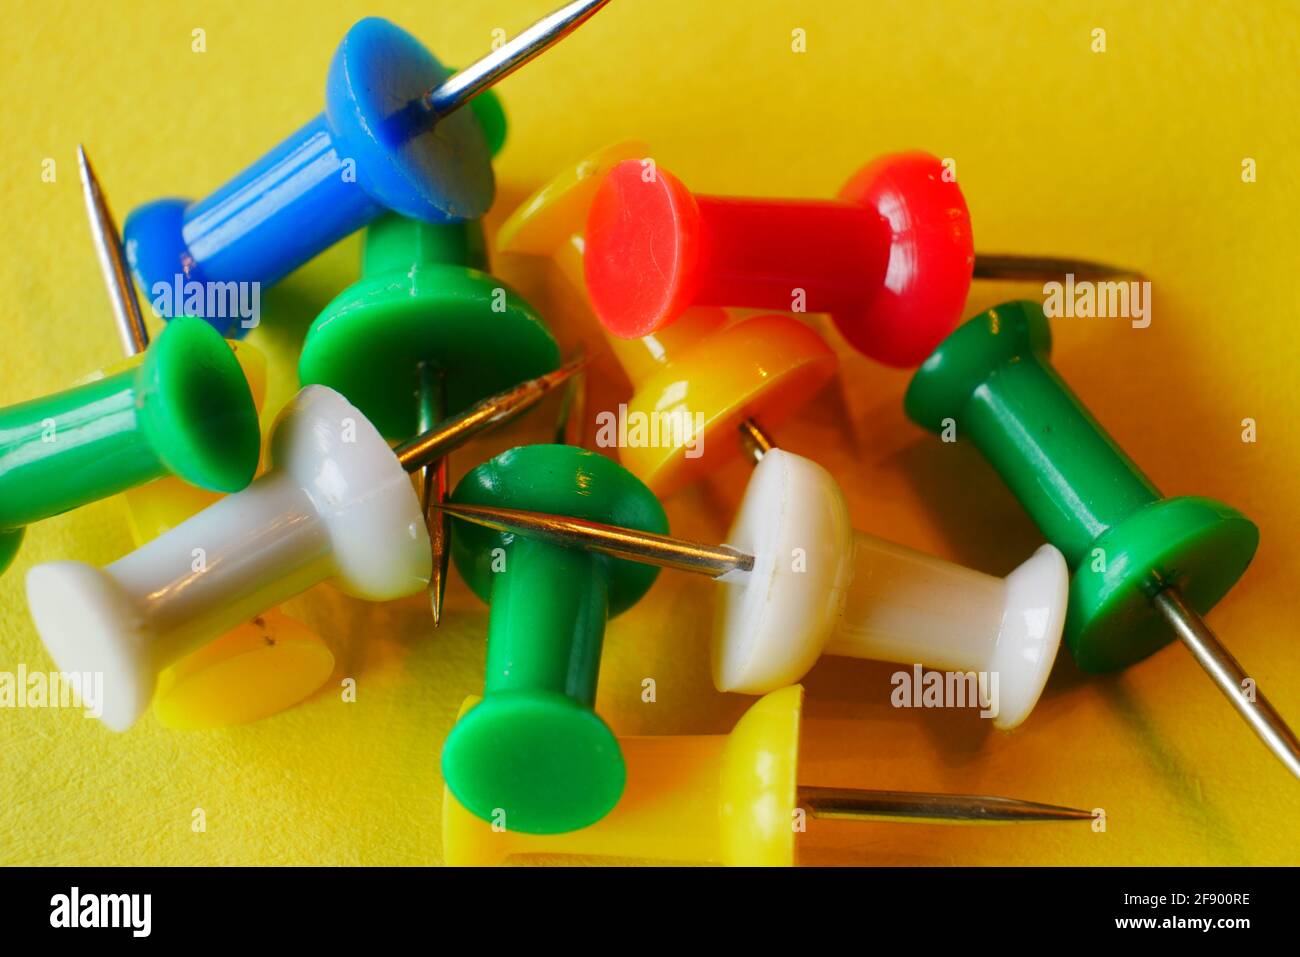 close up of colorful thumbtacks in the colors red yellow white blue green on yellow paper Stock Photo